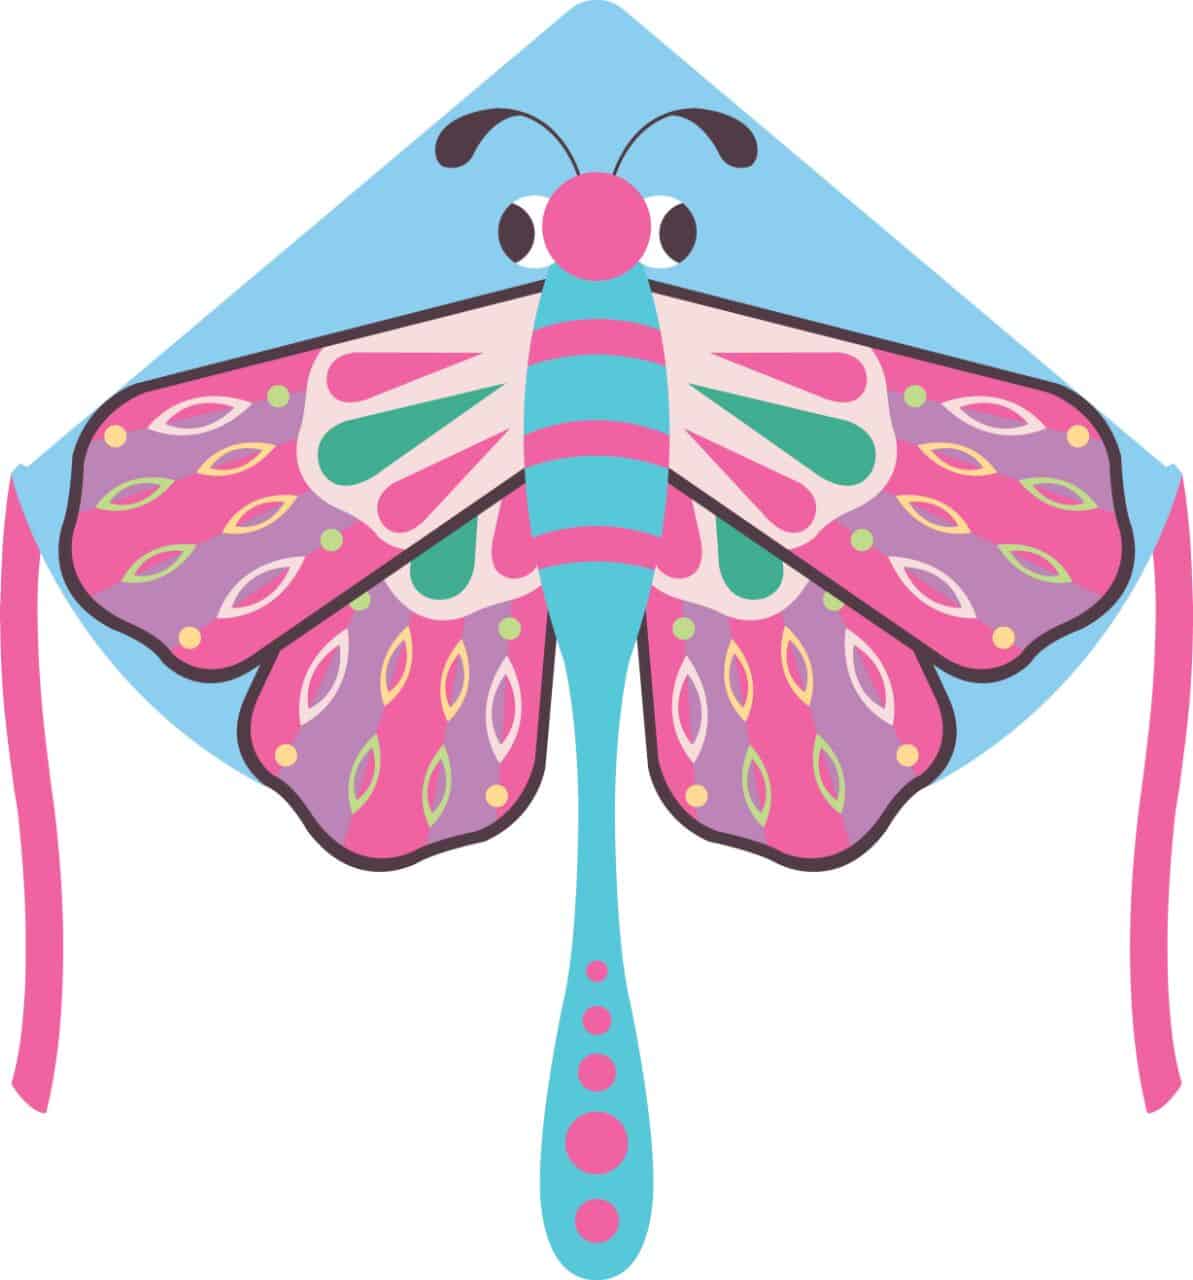 High as a Kite - Beautiful Butterfly Kite